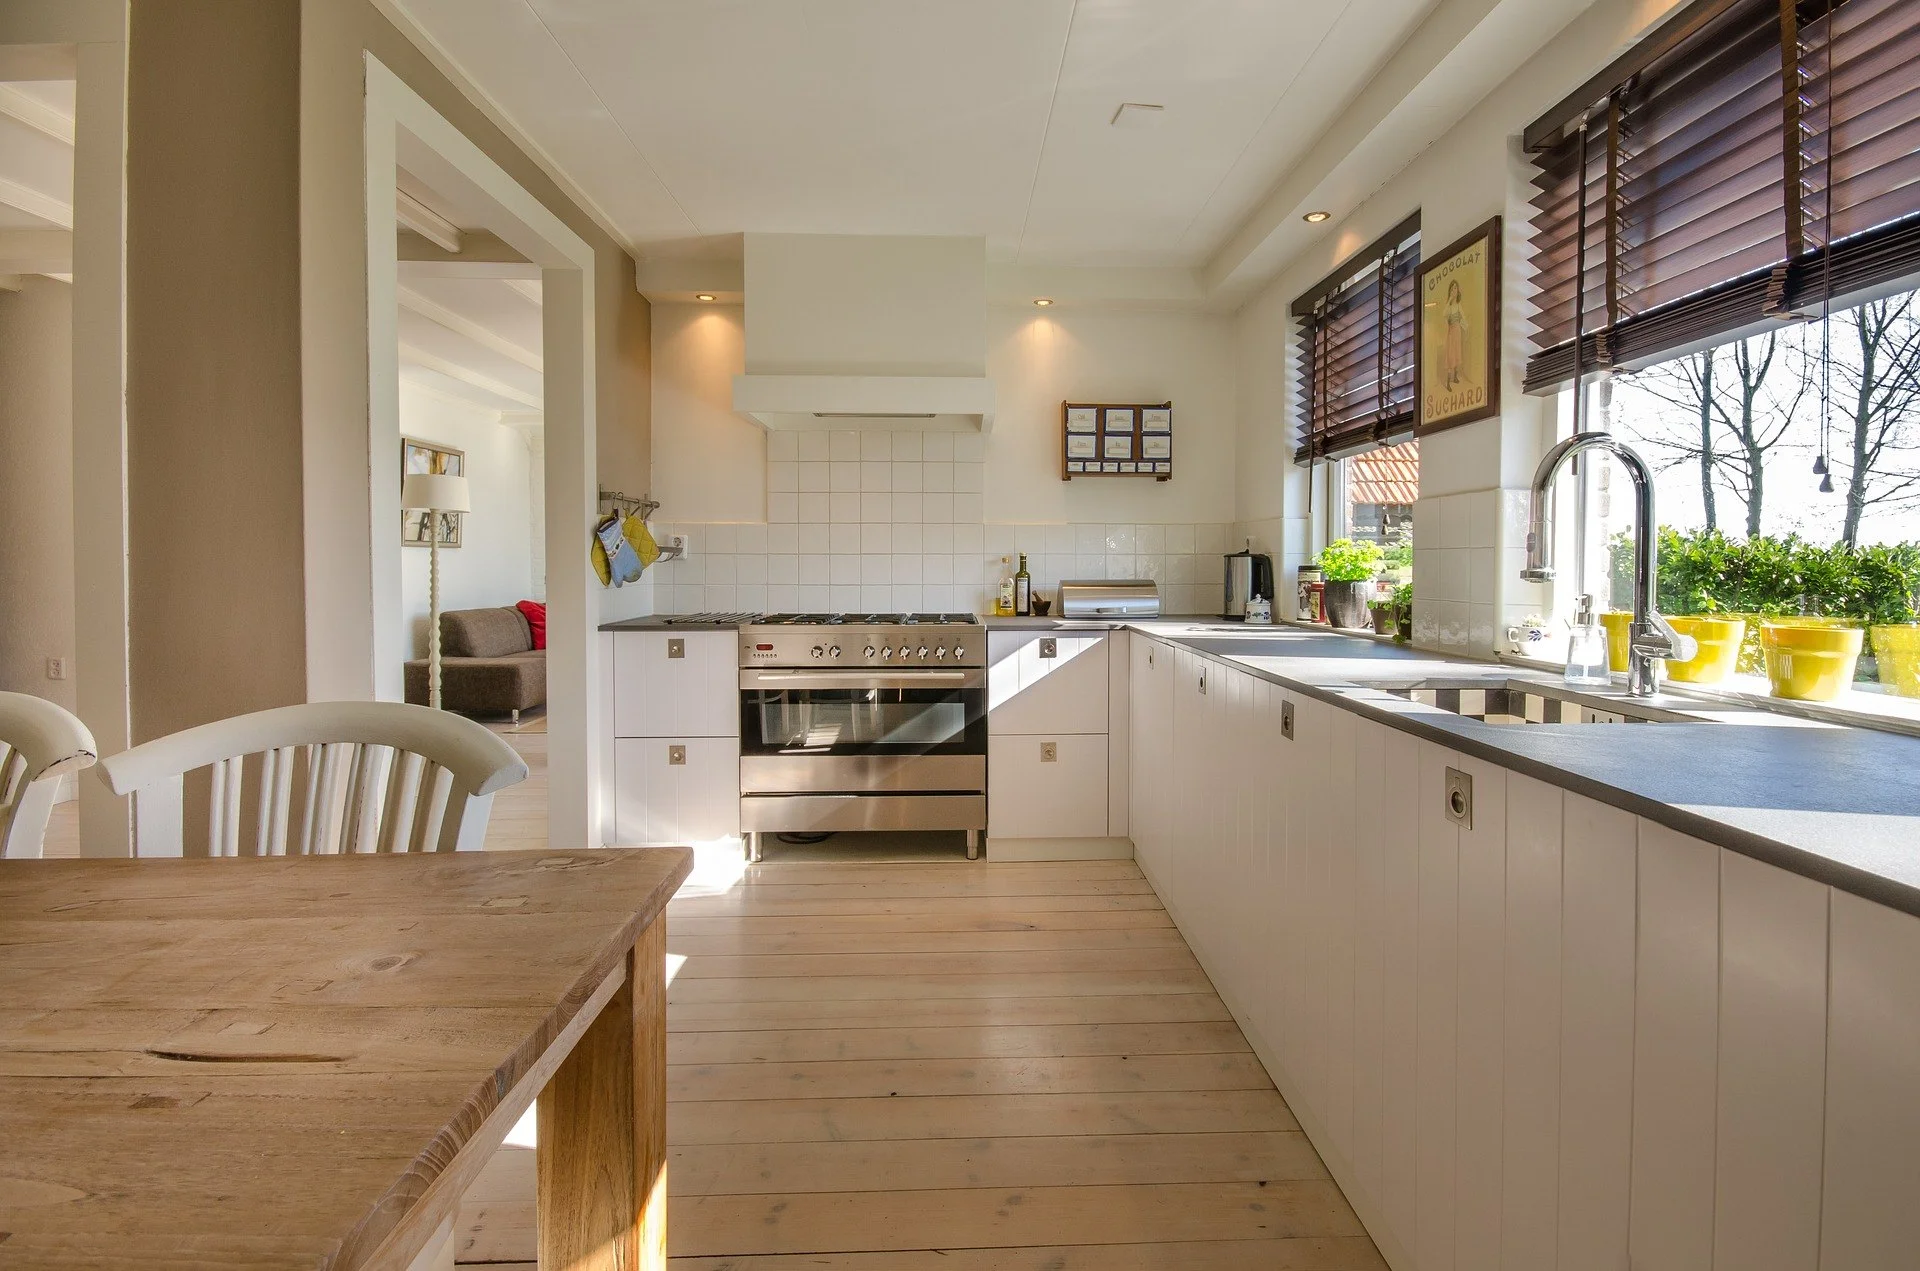 Keeping your kitchen warm – some easy tips and tricks.